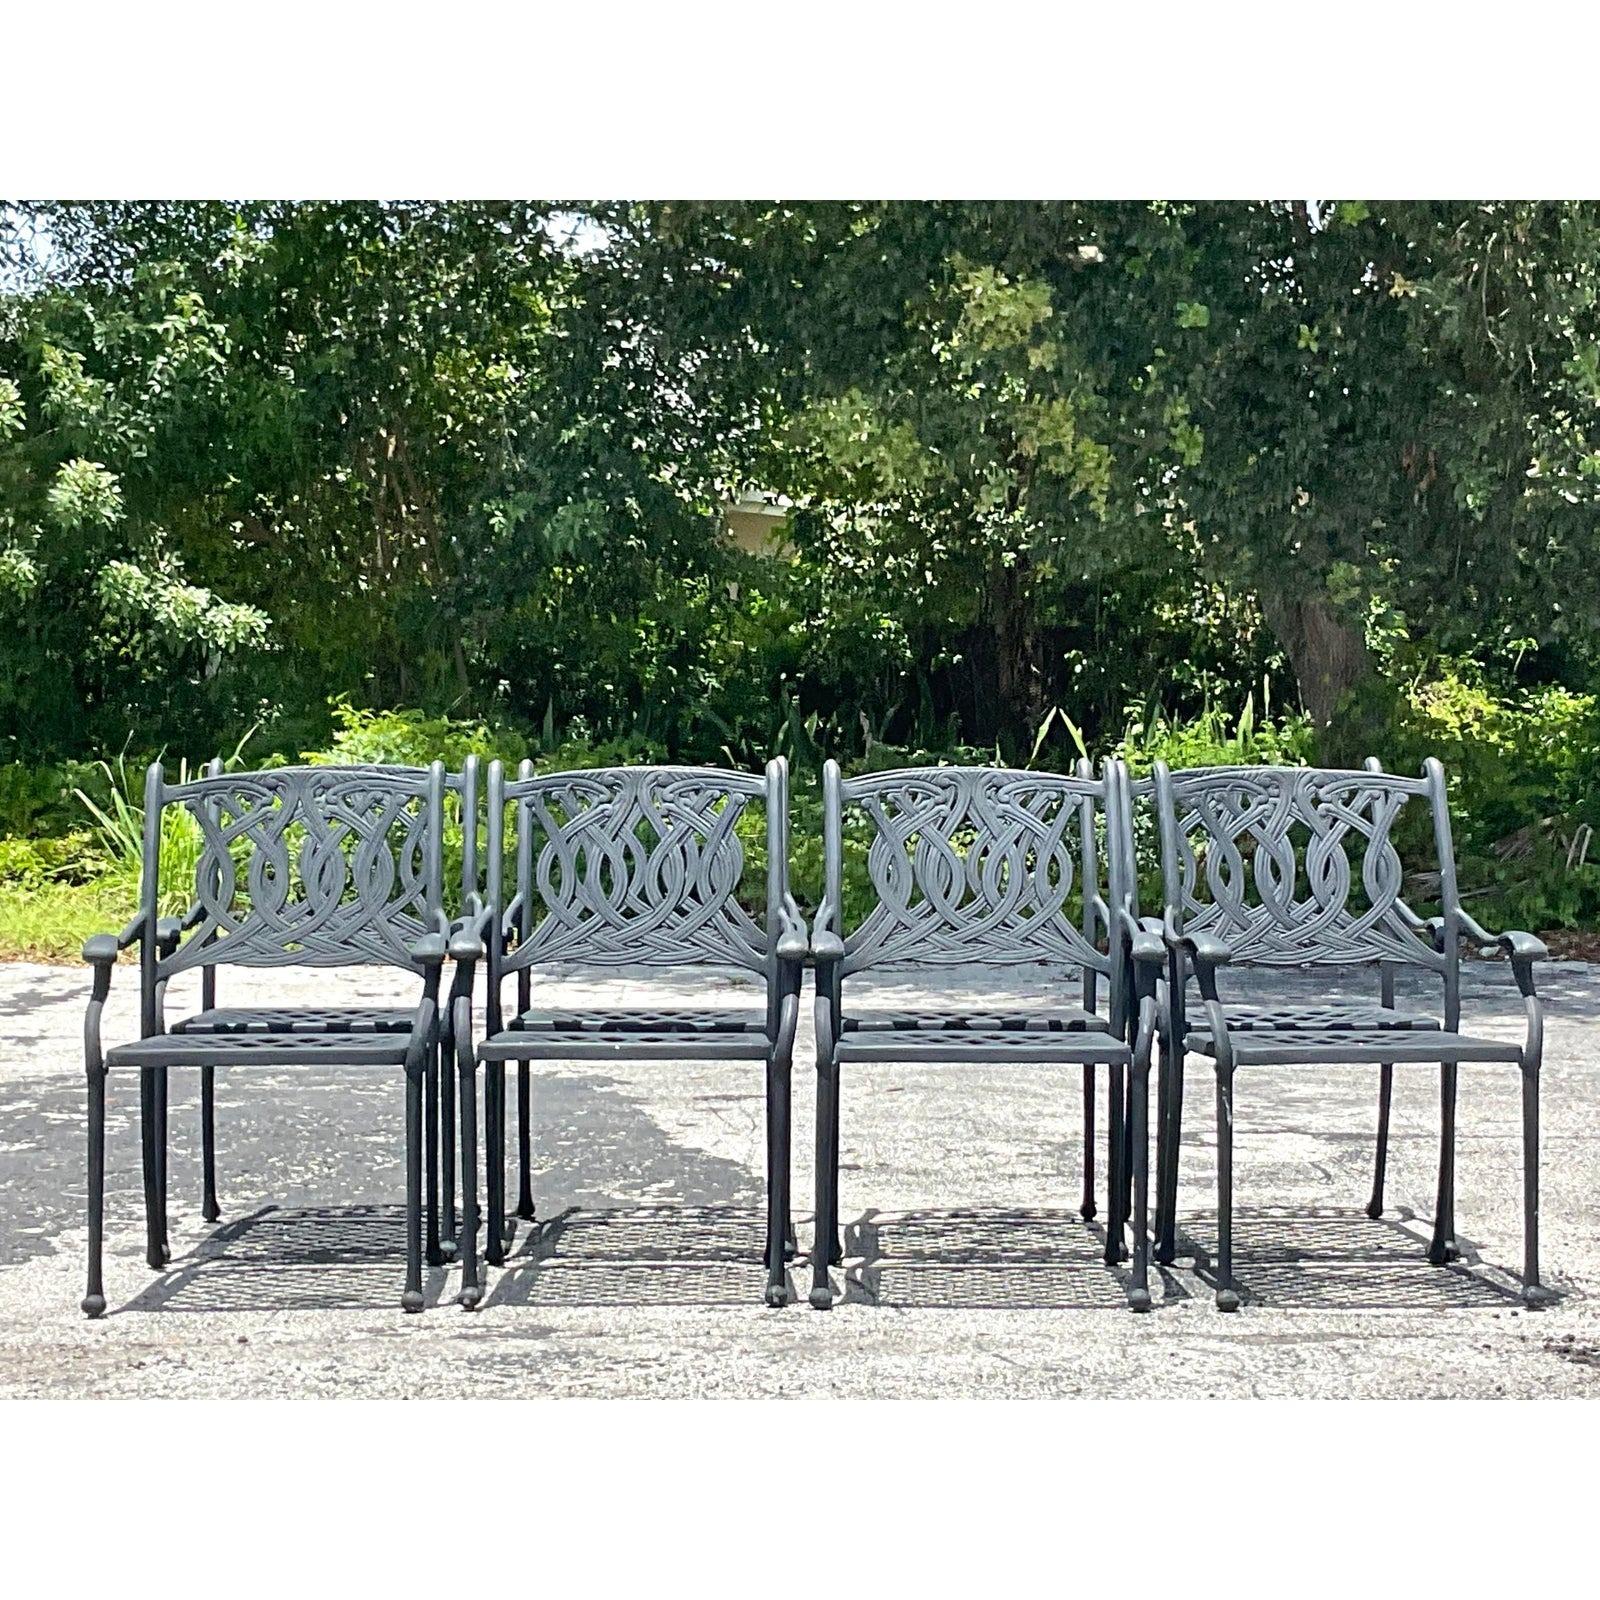 A fabulous set of 8 vintage Coastal outdoor cast aluminum dining chairs. A chic scroll design in a matte black finish. Perfect as is or easily repainted to suit your project. Additional chairs available. Acquired from a Palm Beach estate.

Seat